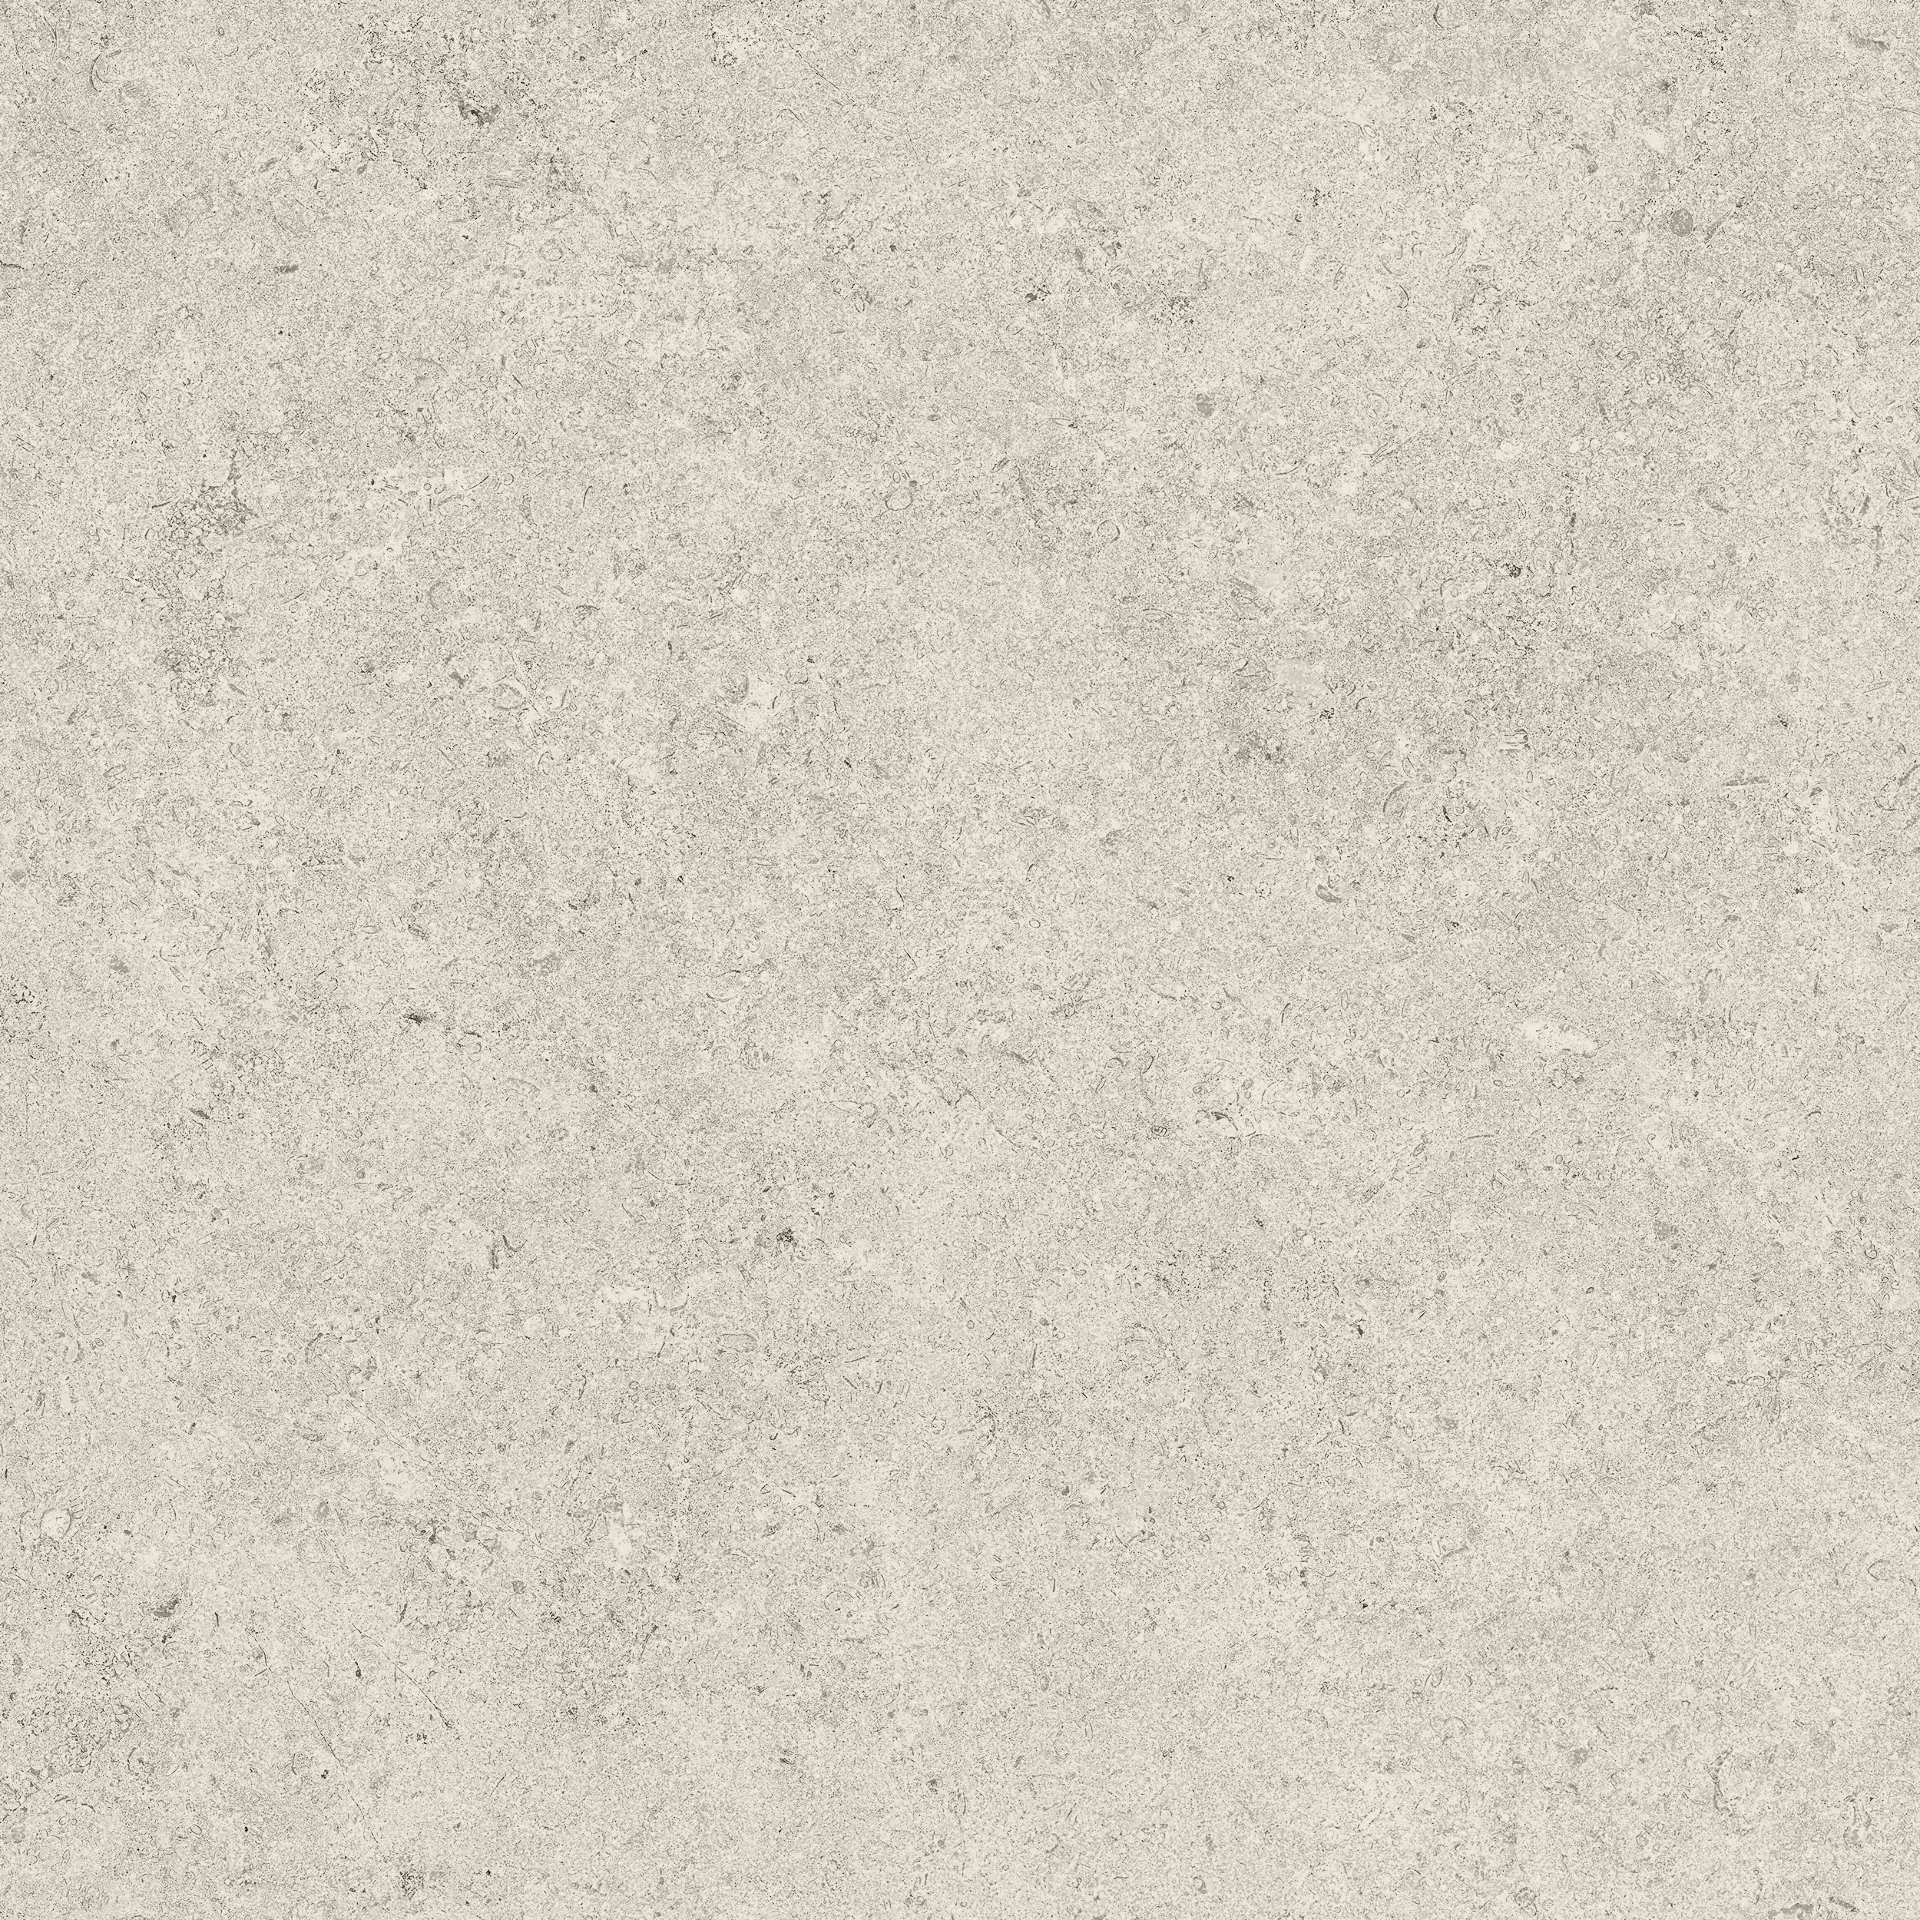 Cottodeste Pura Pearl Rolled Protect EGWPR25 60x60cm rectified 14mm